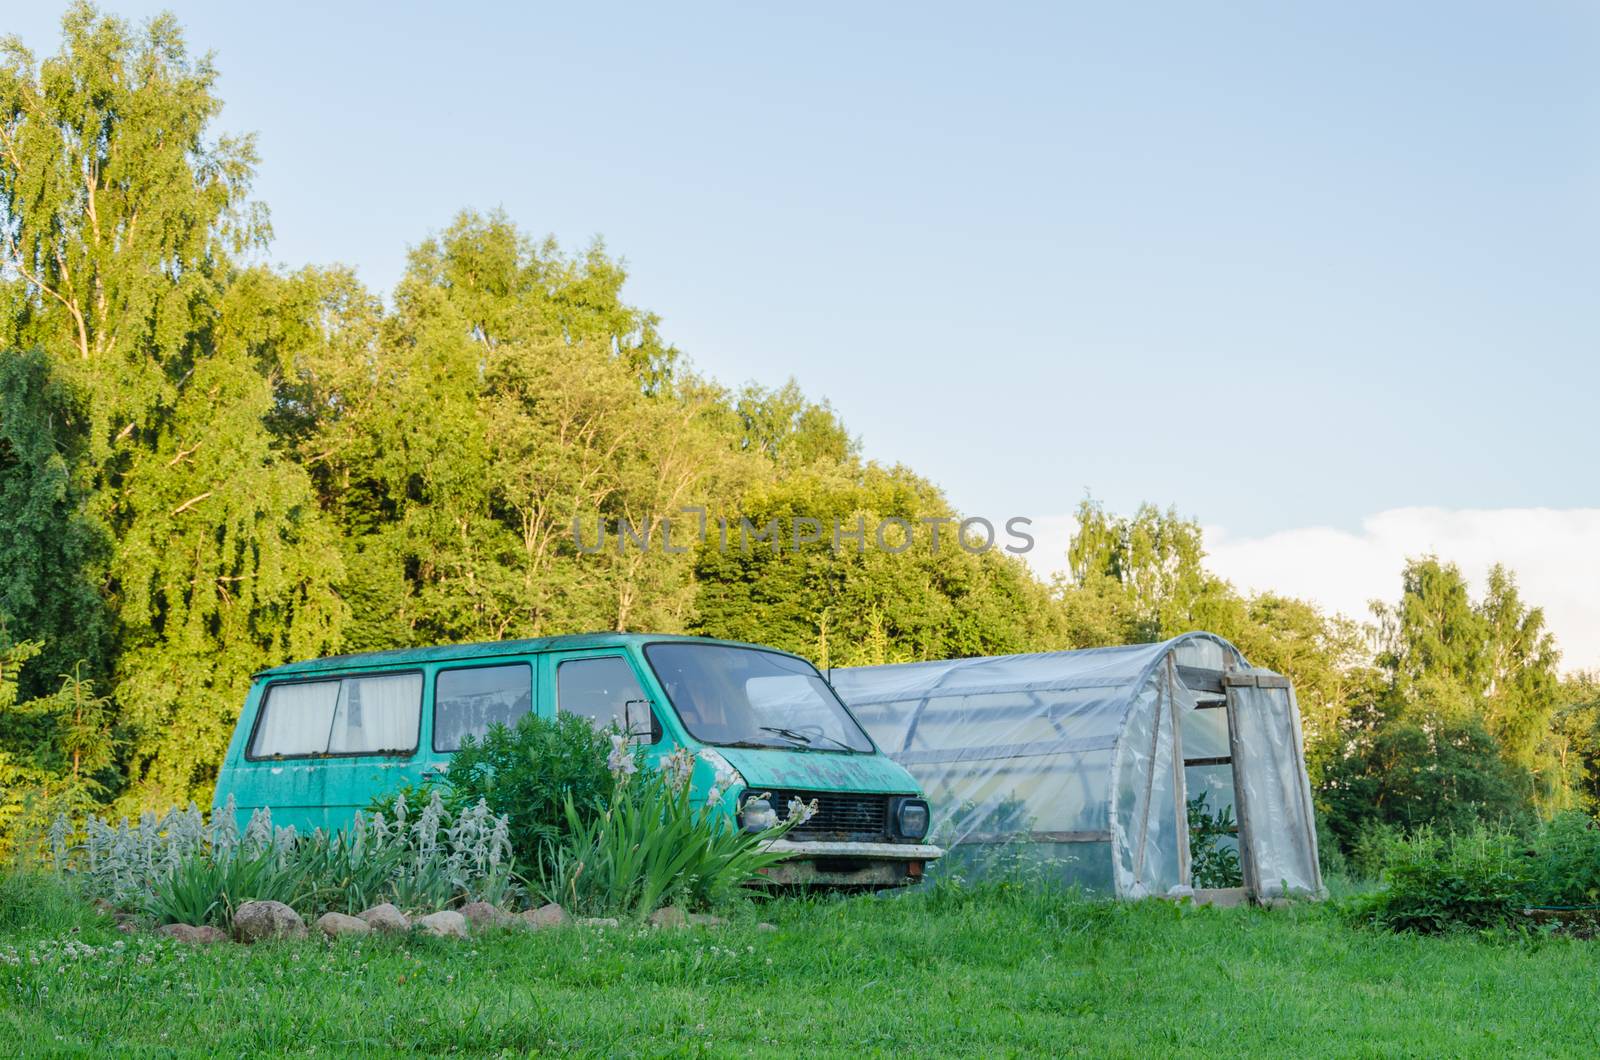 mini bus parked next to village greenhouse in yard by sauletas